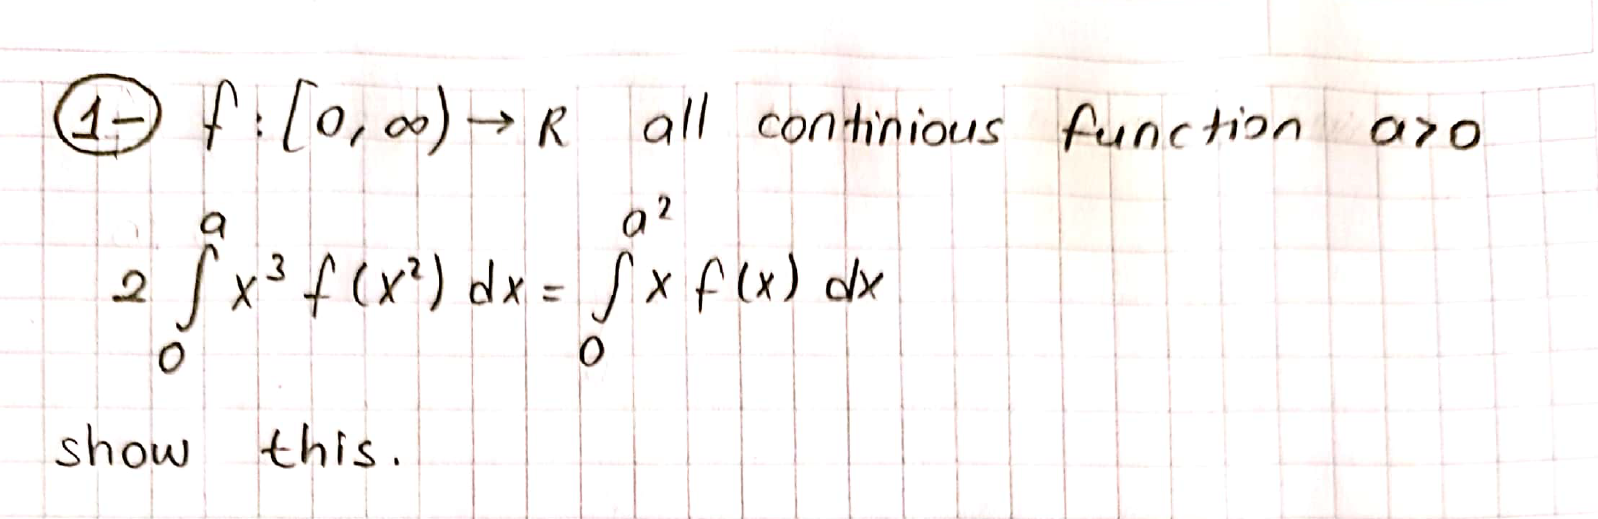 4-
fil0,00)→R all continious Aunction aro
Sx³f(x?)dx= Sx f(x) dx
%3D
show this.
